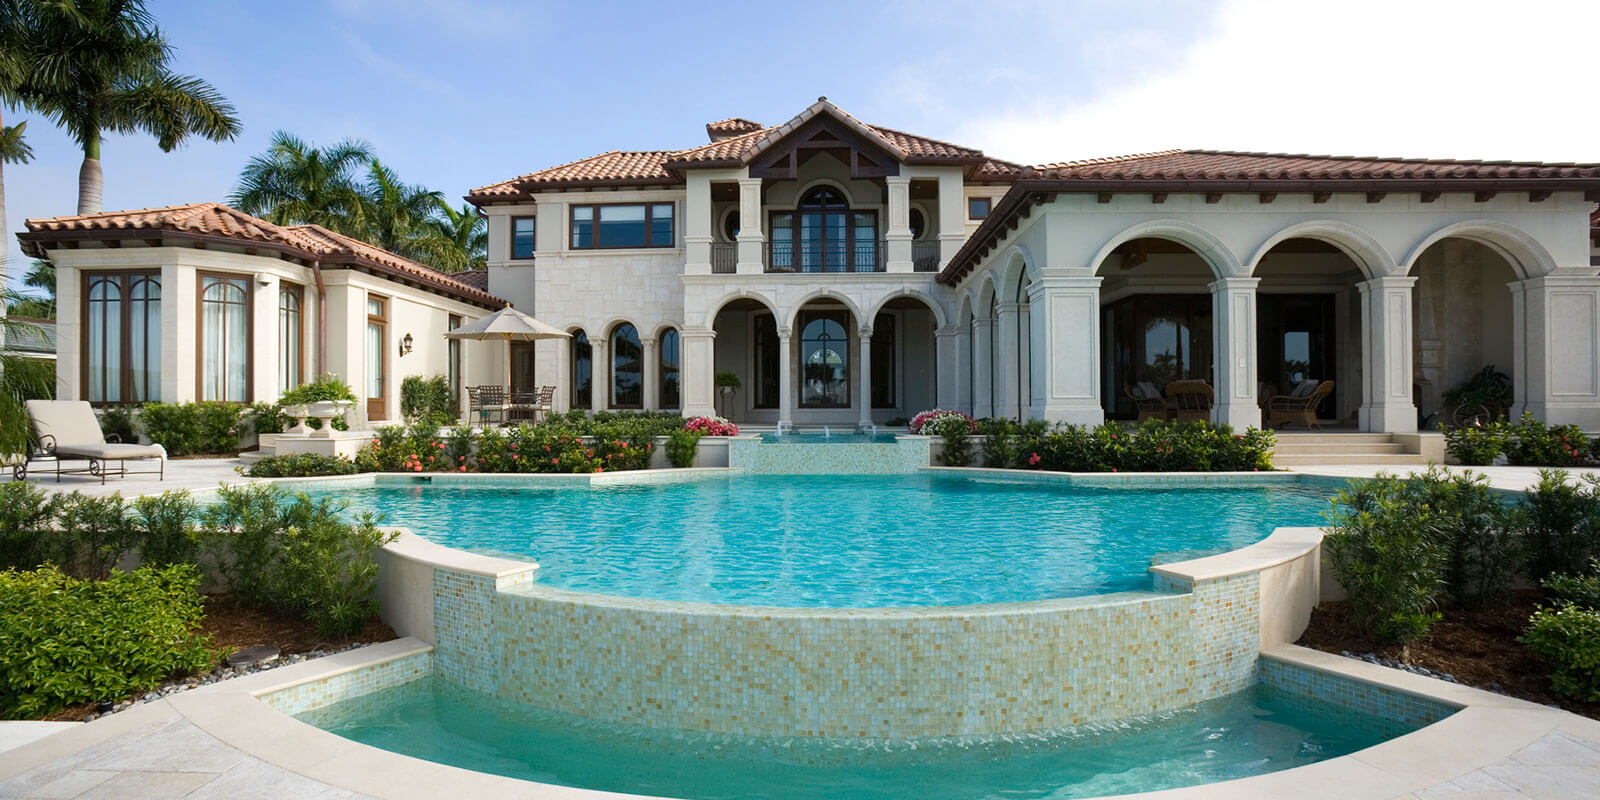 Luxury Mansion with a Beautiful Swimming pool